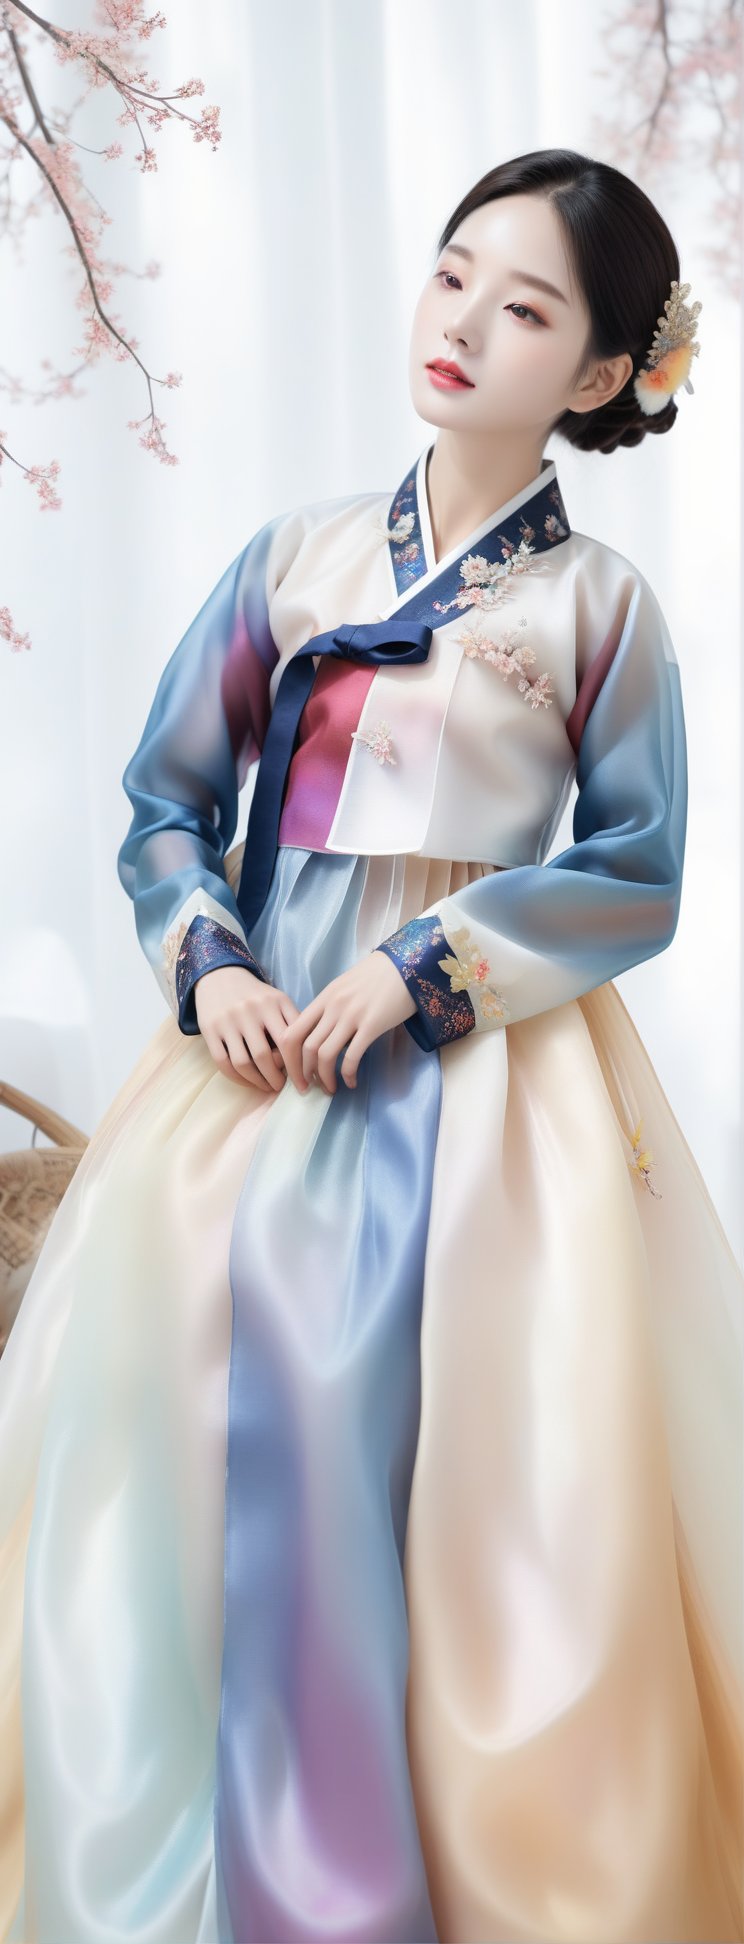 Erotic image, (soft shiny gradient shearing organza fabric hanbok with five-colored brilliant accessories and jewels),
Top quality, masterpiece, ultra-high definition, (cute face), (perfect brown eyes), misty, mysterious multi-colored clouds, nameless flowers and trees, surreal illustrations, natural proportions, ultra HD, realistic, vivid colors, highly detailed, UHD drawing, perfect composition, ultra HD, 8k, mythical creatures, textures, iridescent and luminous, breathtaking beauty, pure perfection, divine beings, unforgettable, impressive, medium bust,hubggirl